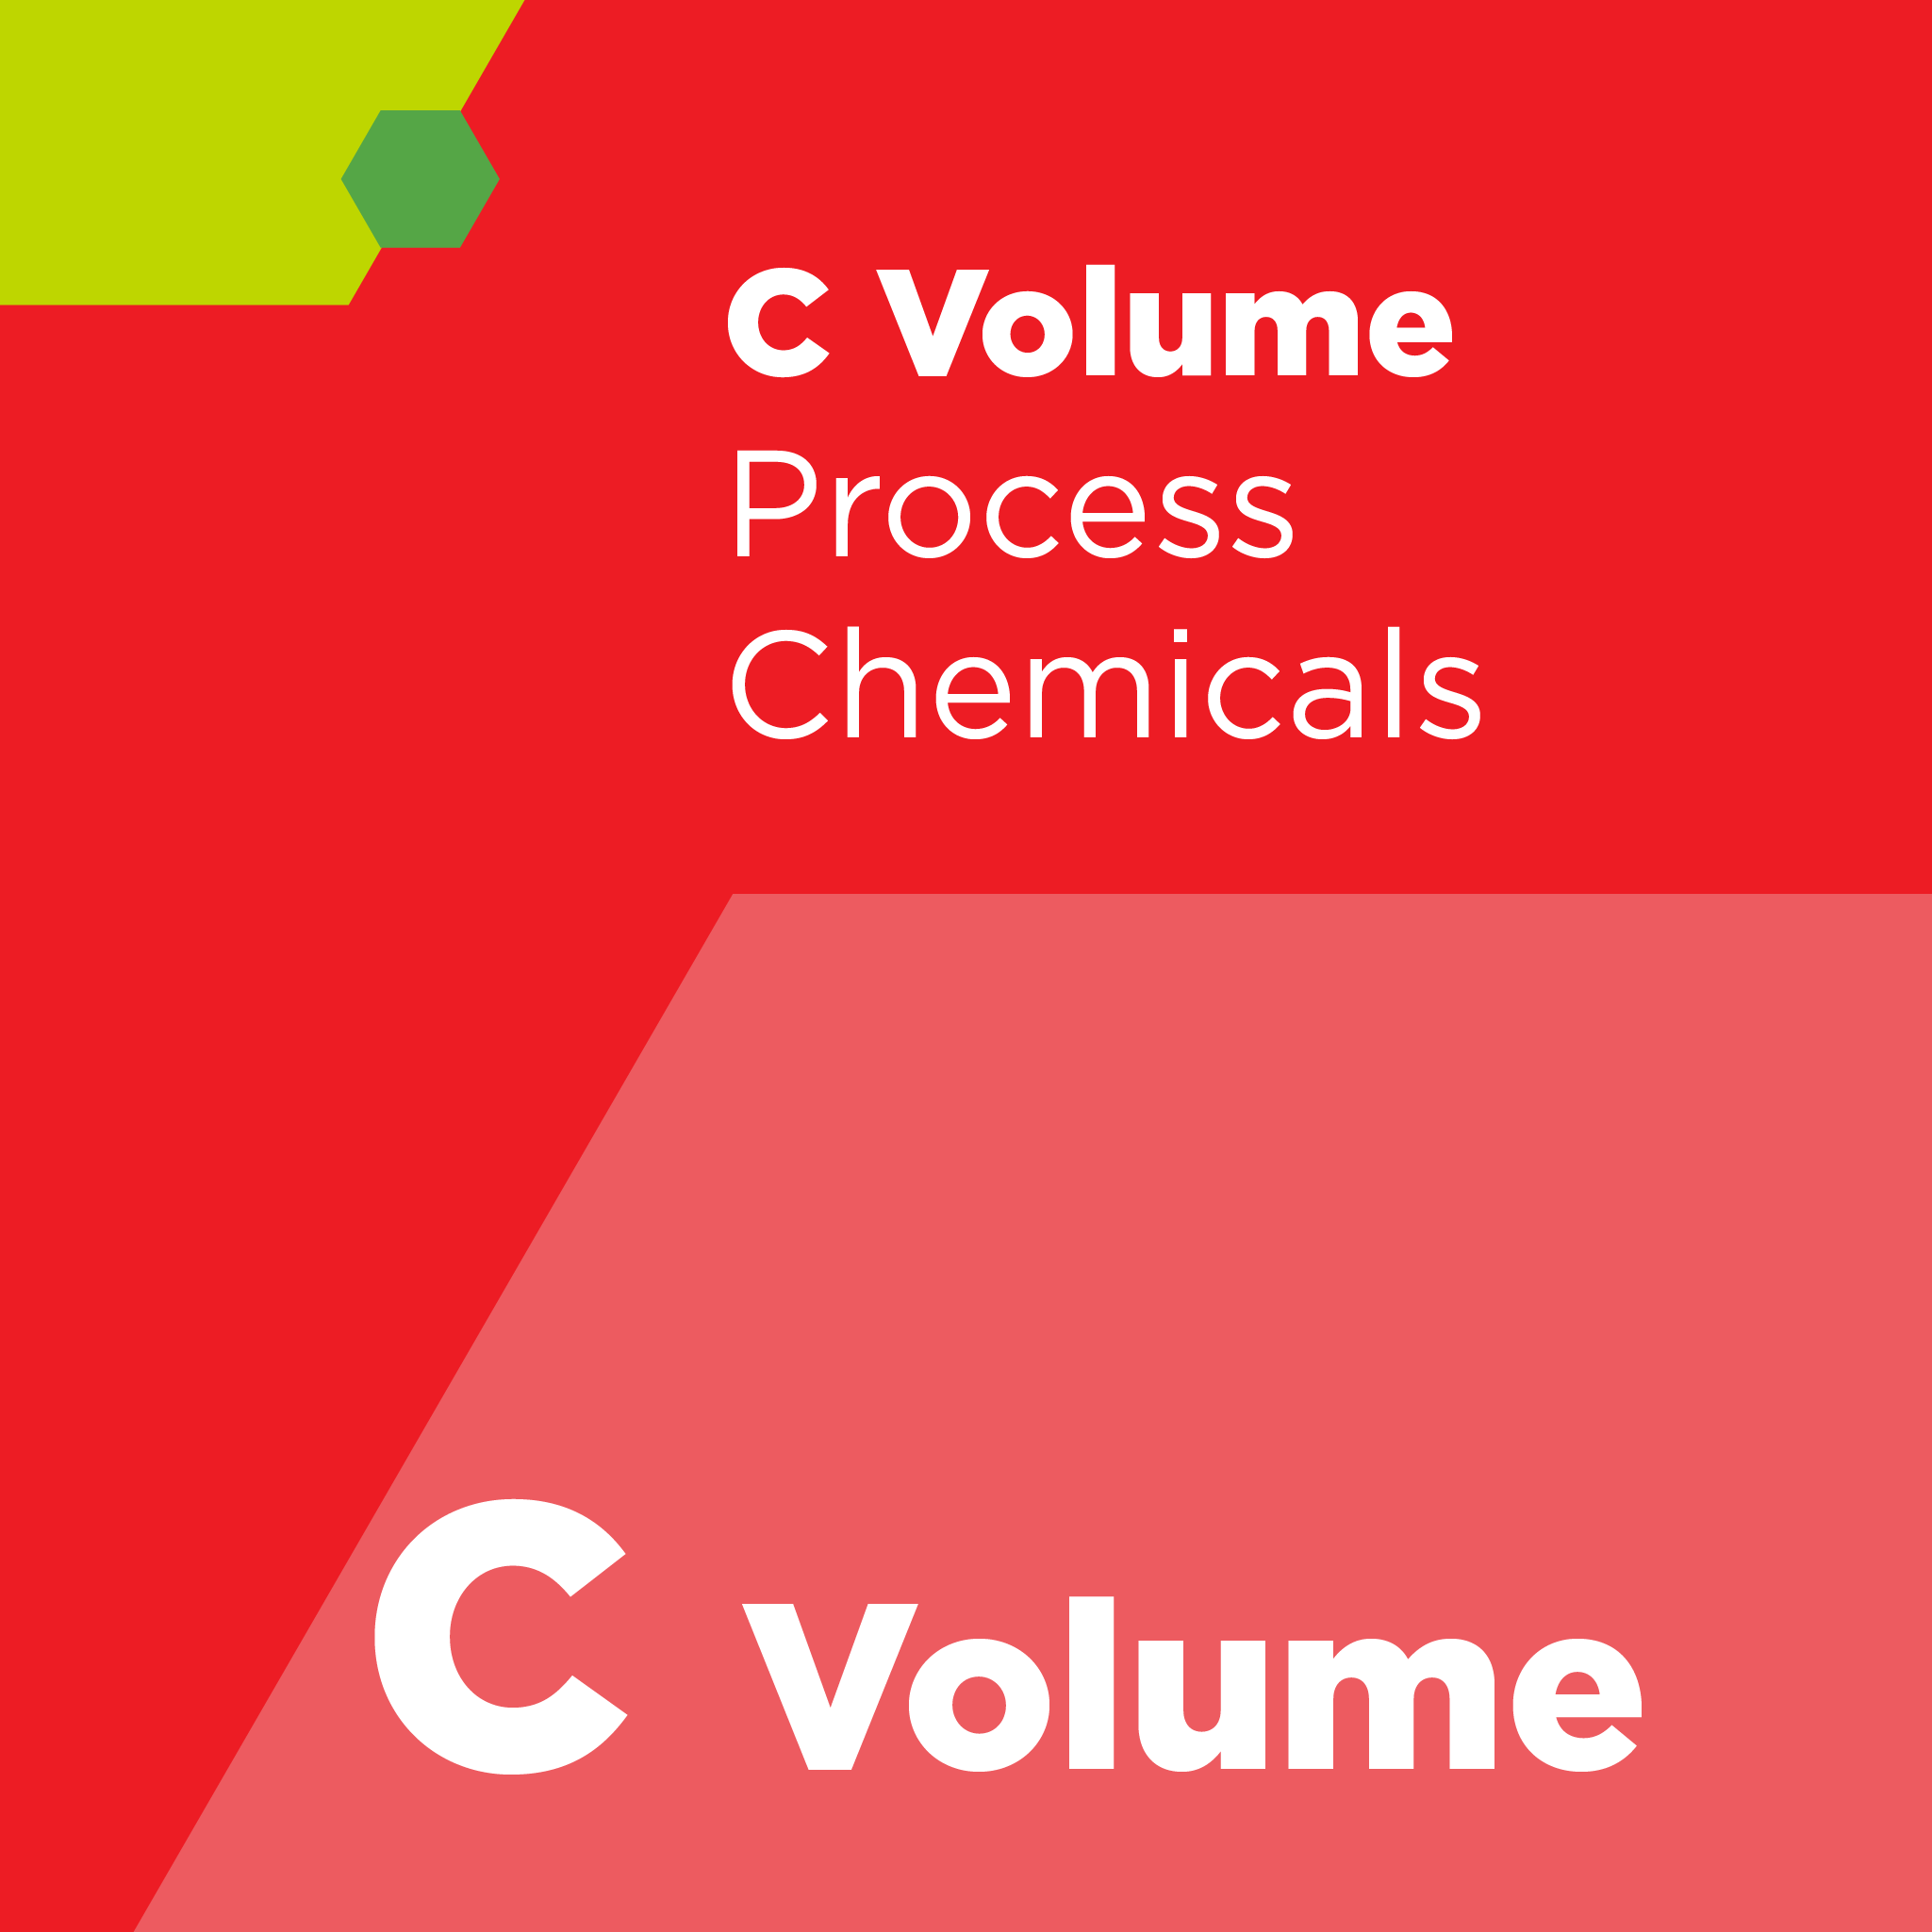 C05300 - SEMI C53 - Specifications for Dimethyl Sulfoxide (DMSO) [Grades 1 and 2]